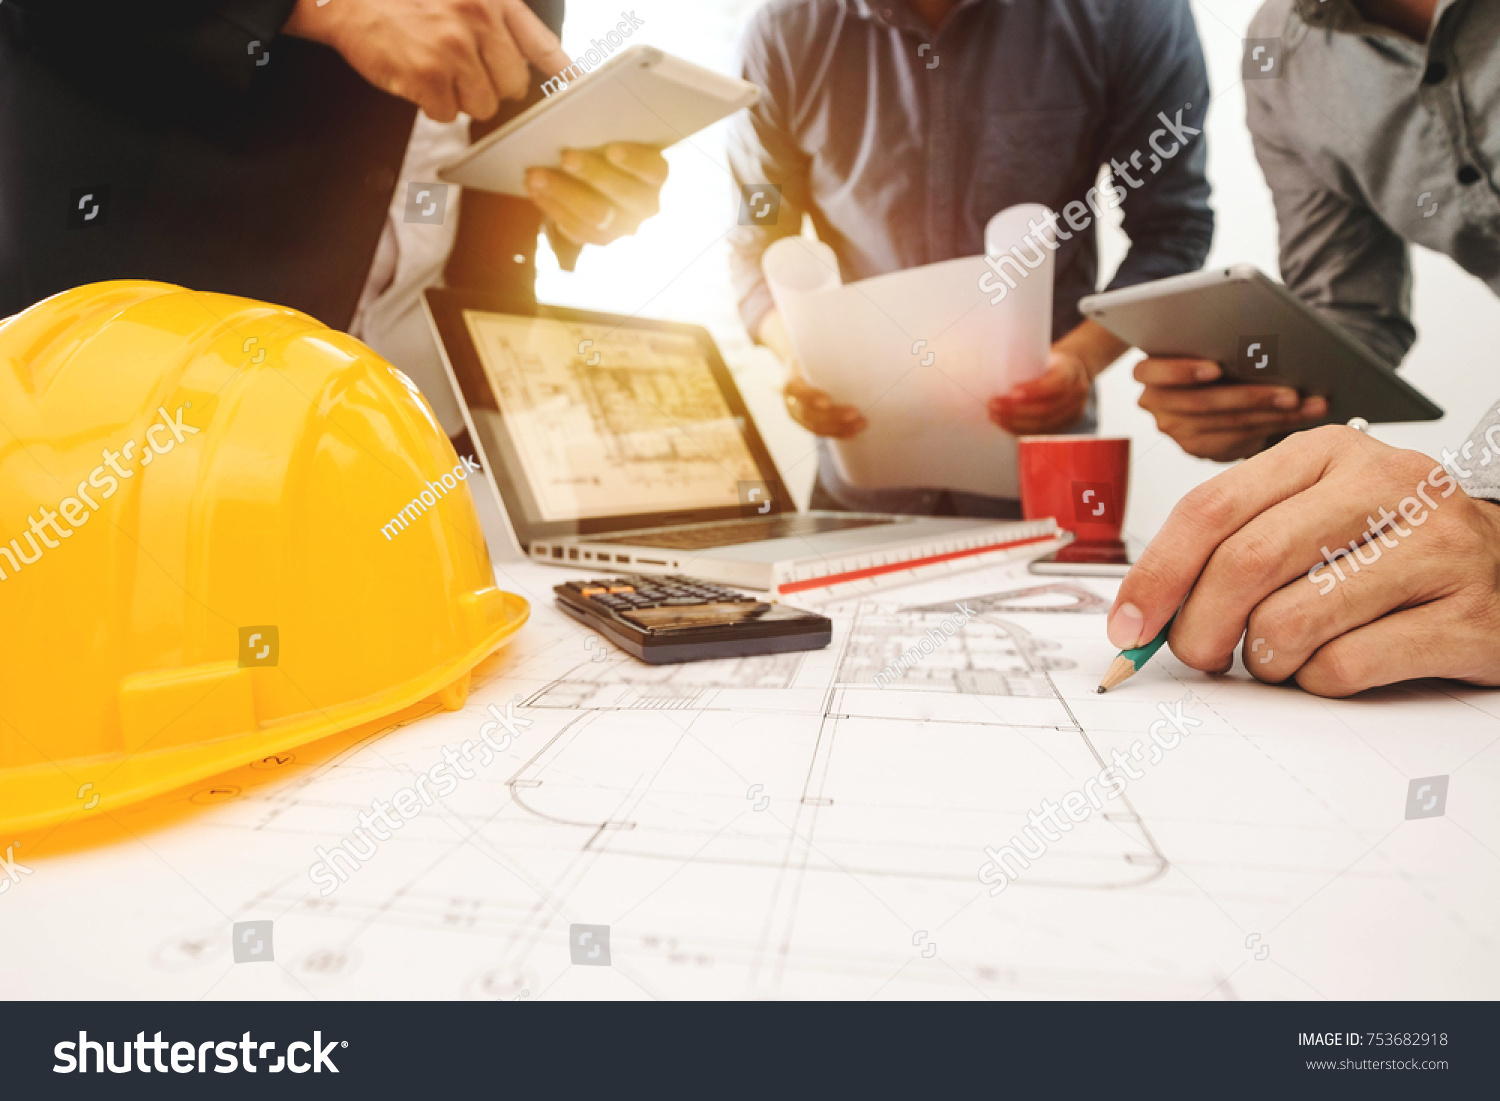 Three colleagues discussing data working and tablet, laptop with on on architectural project at construction site at desk in office
 #753682918